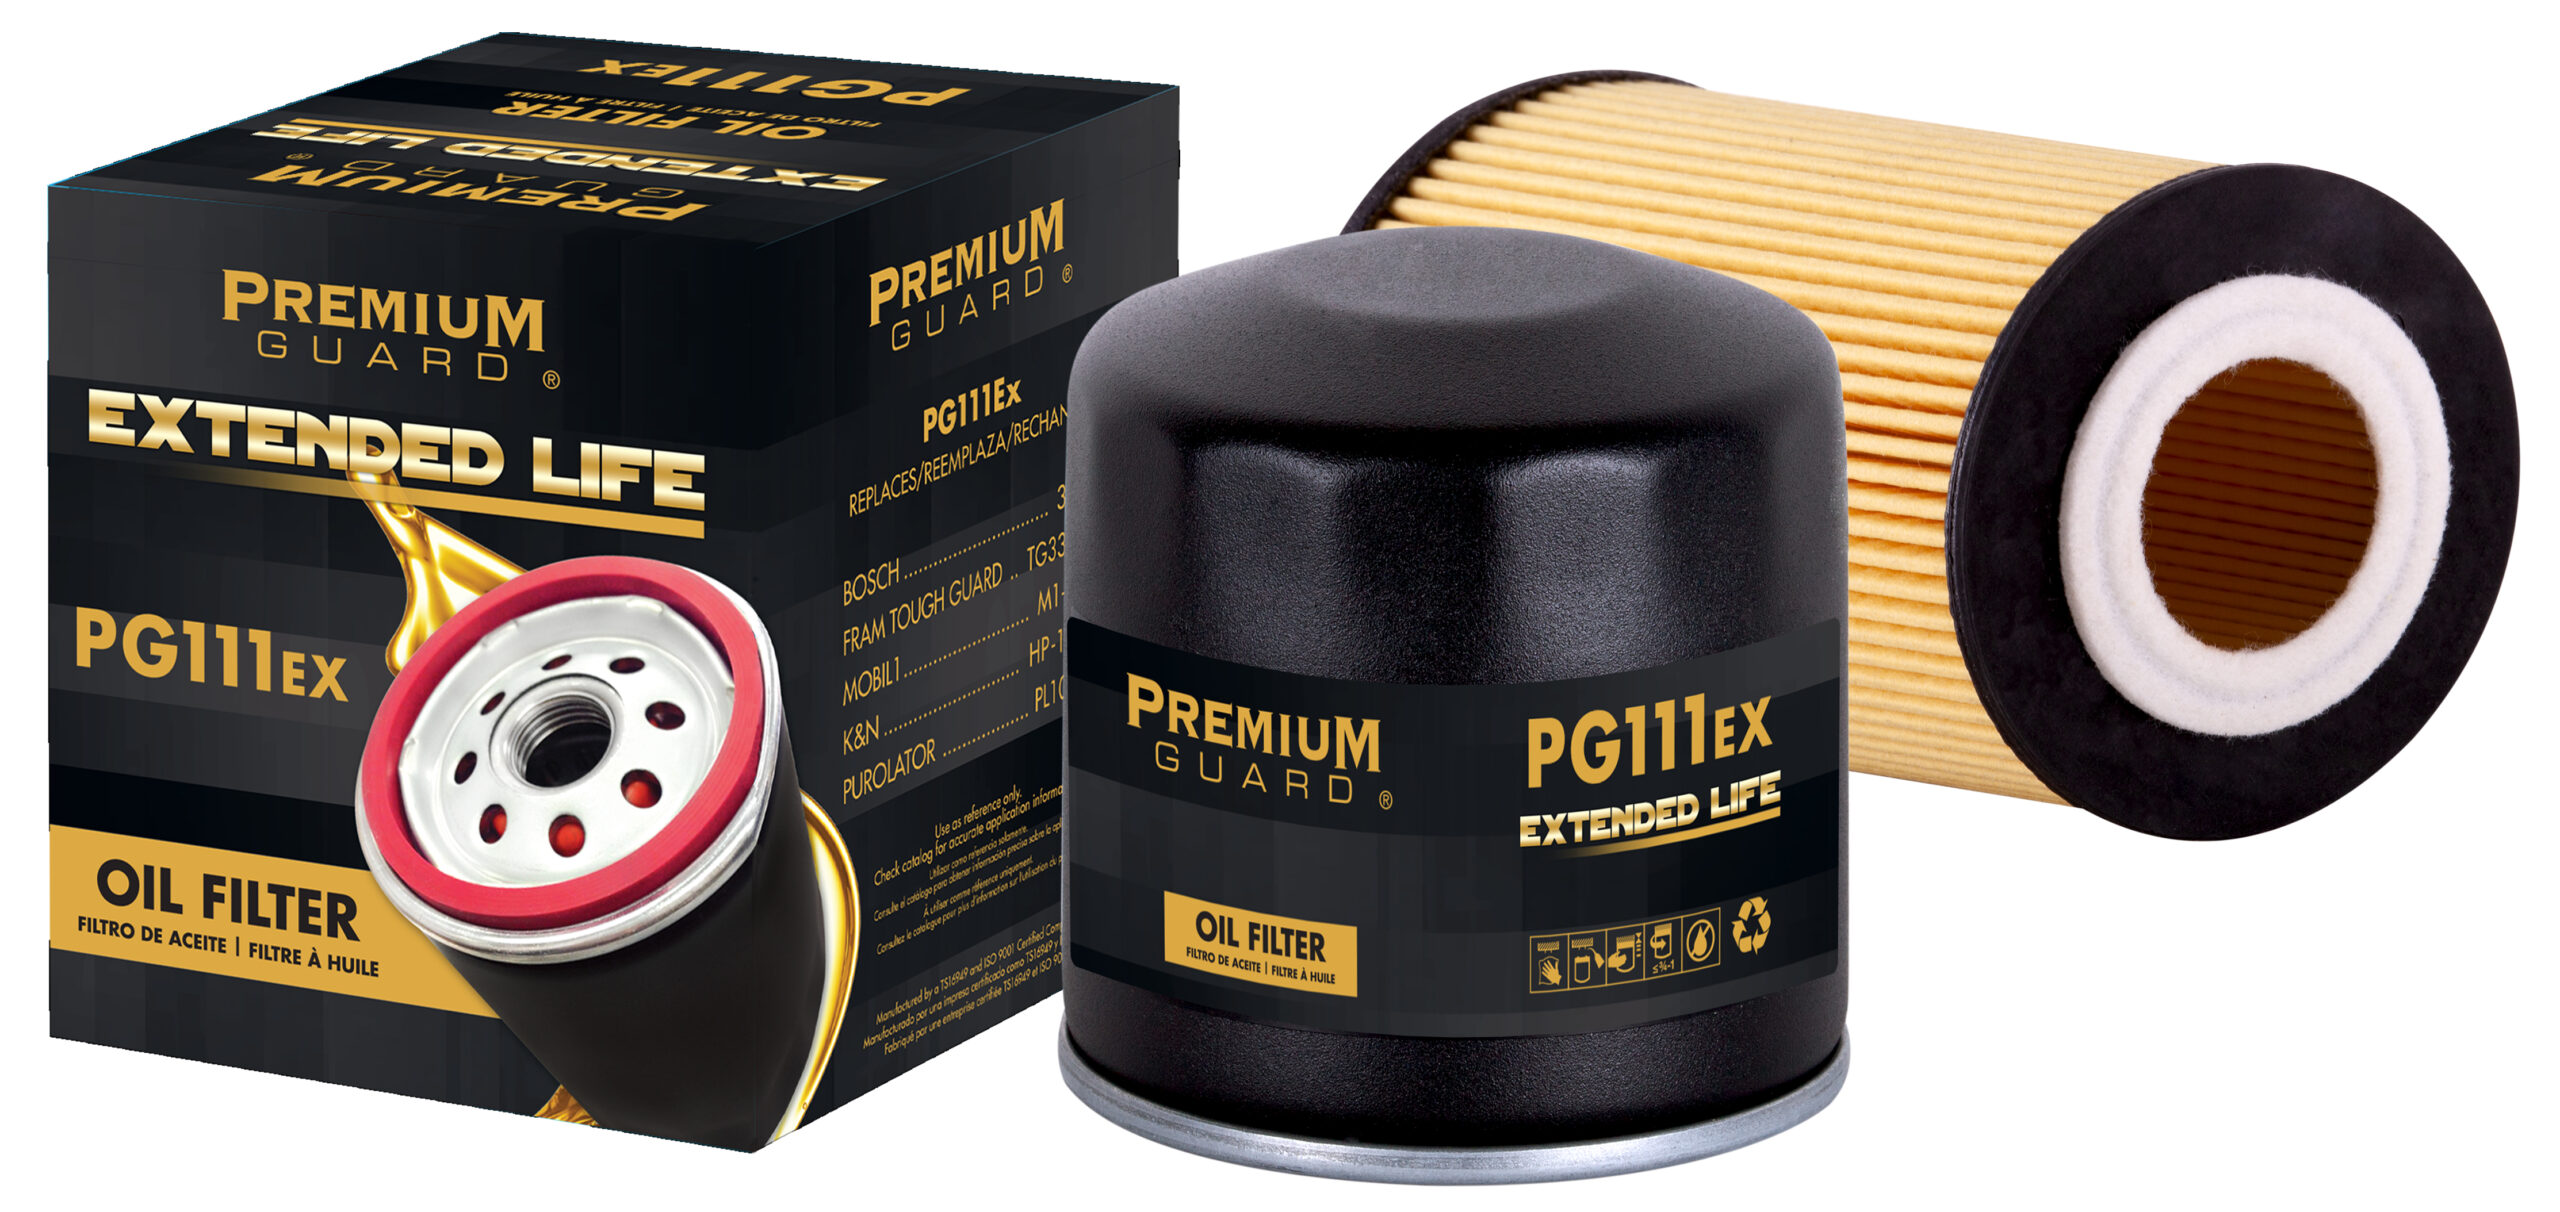 premium guard extended life oil filters collage